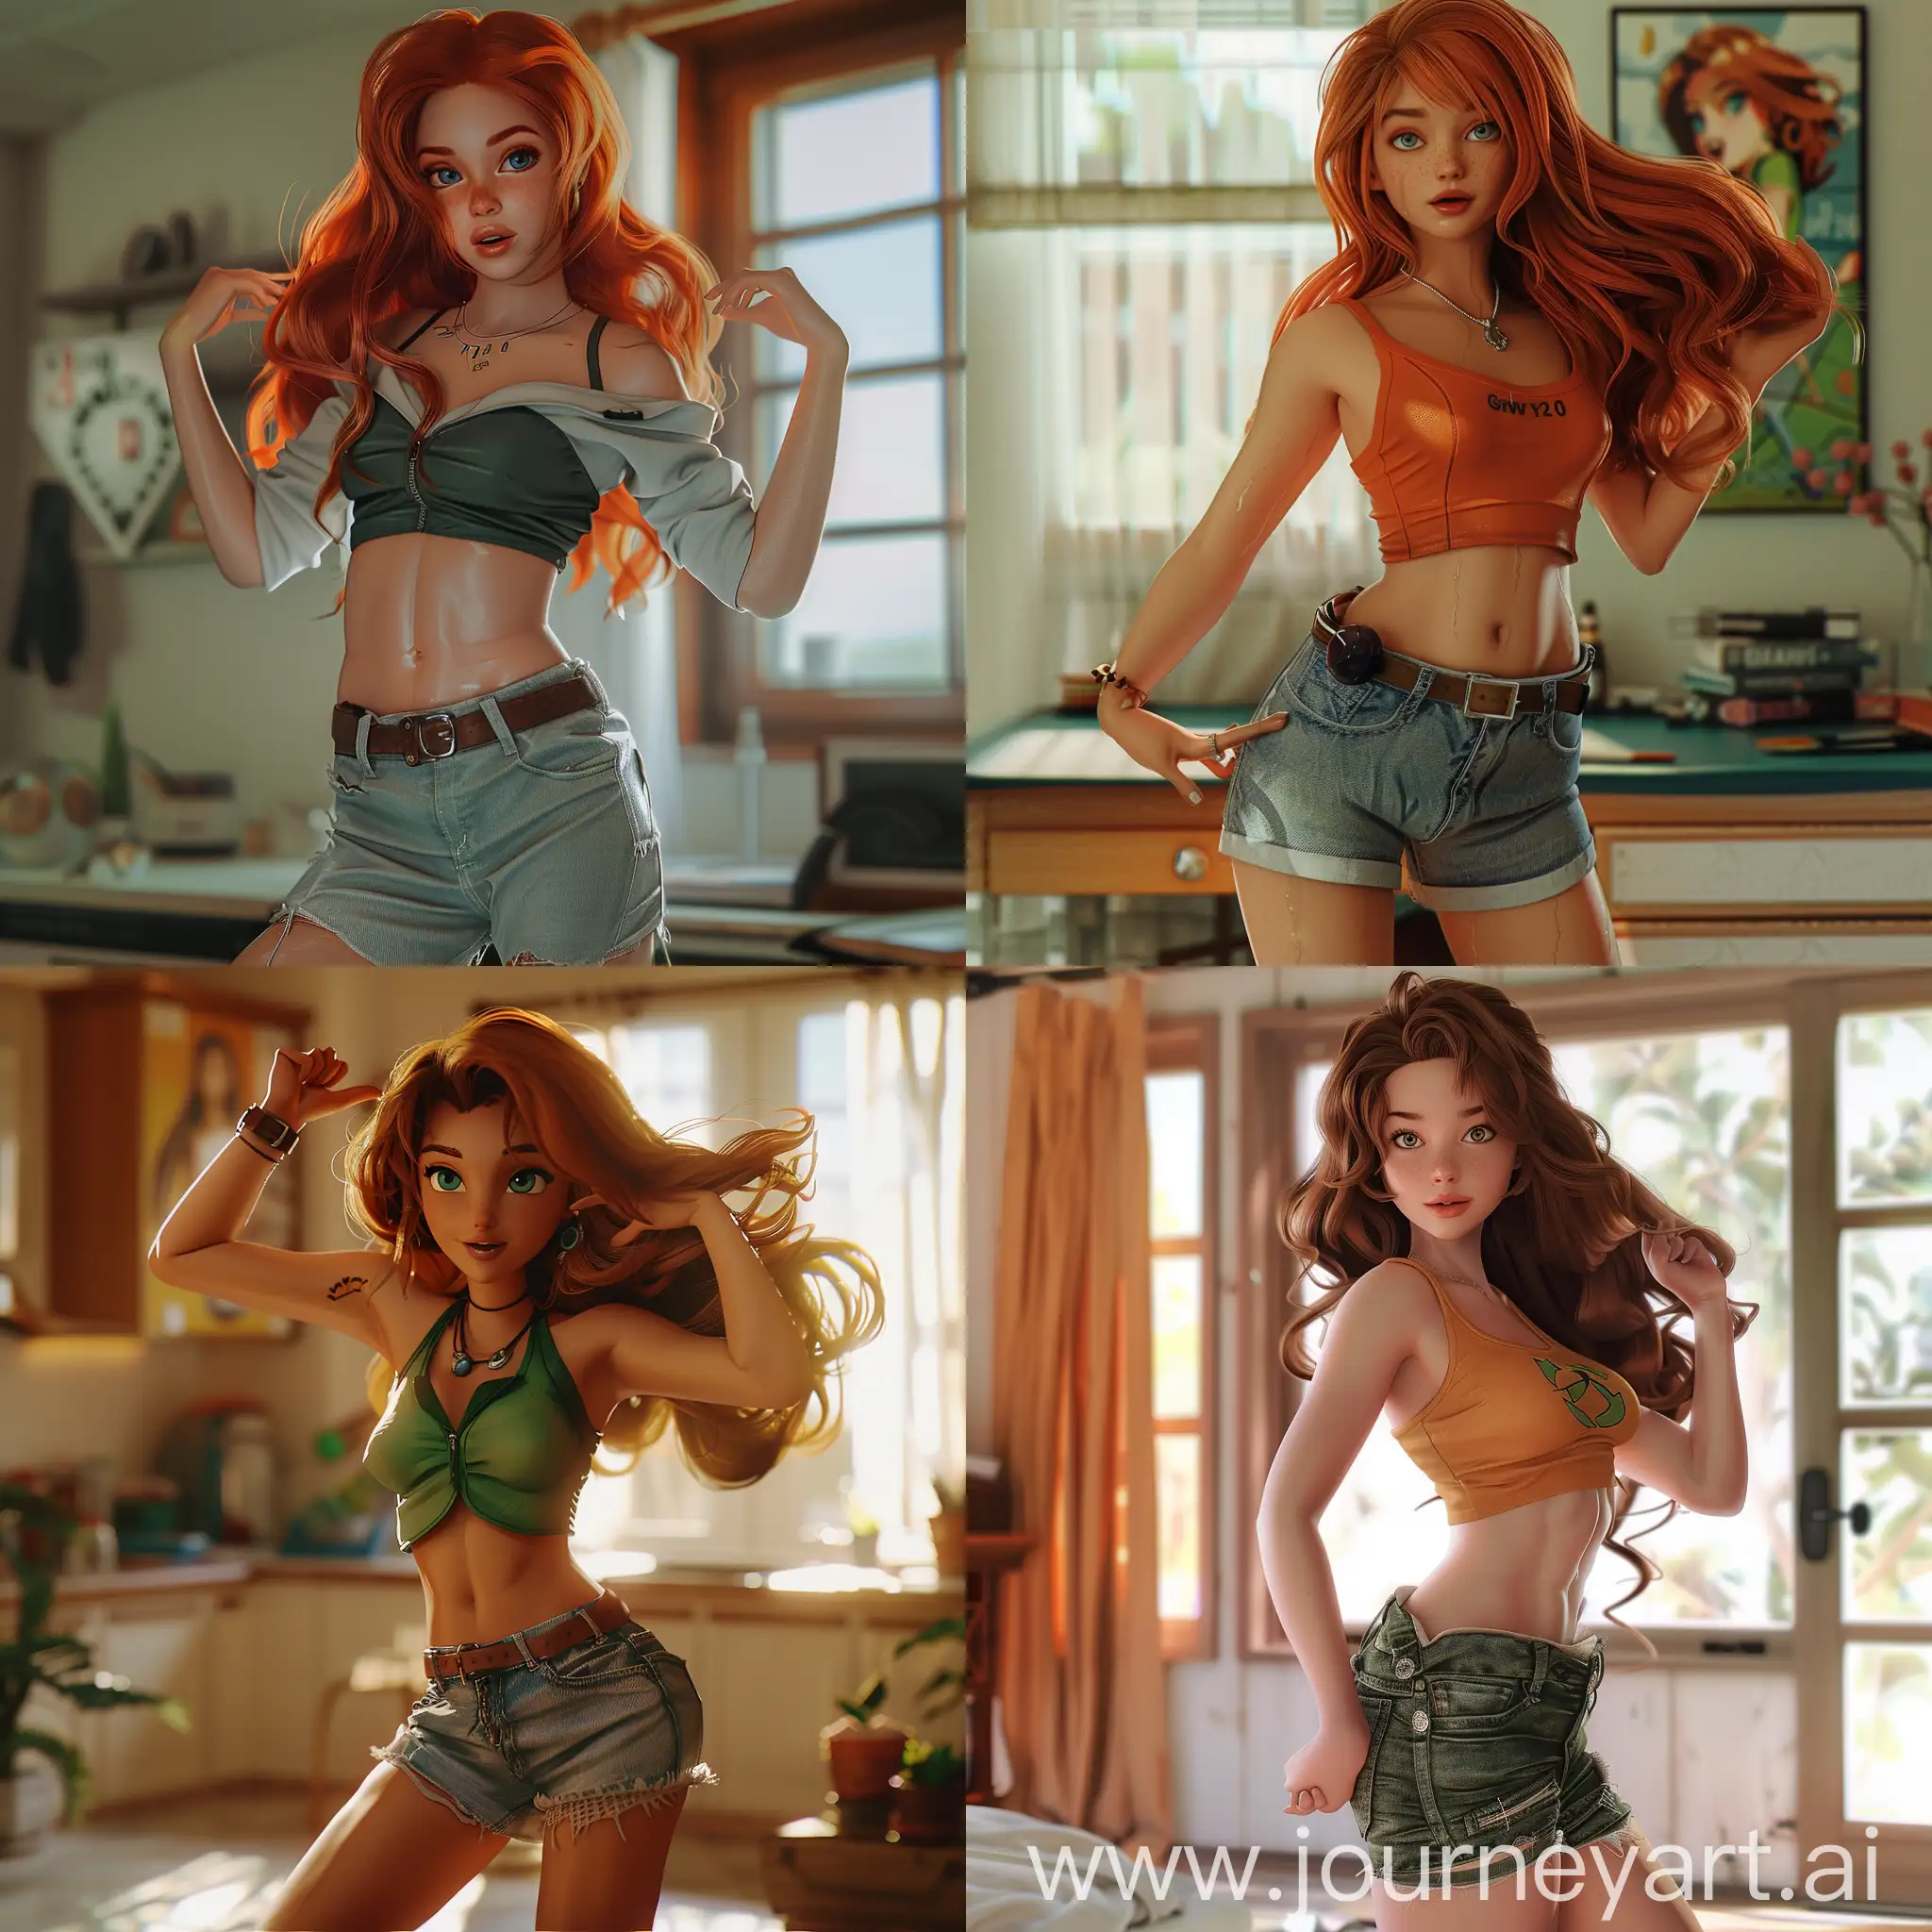 a stunning photo of a very beautiful curvy, Gwen Tennyson from Ben 10 animation series, wearing casual everyday attire and posing playfully, casual home background, hyperrealistic, photorealistic, waist shot, half body shot